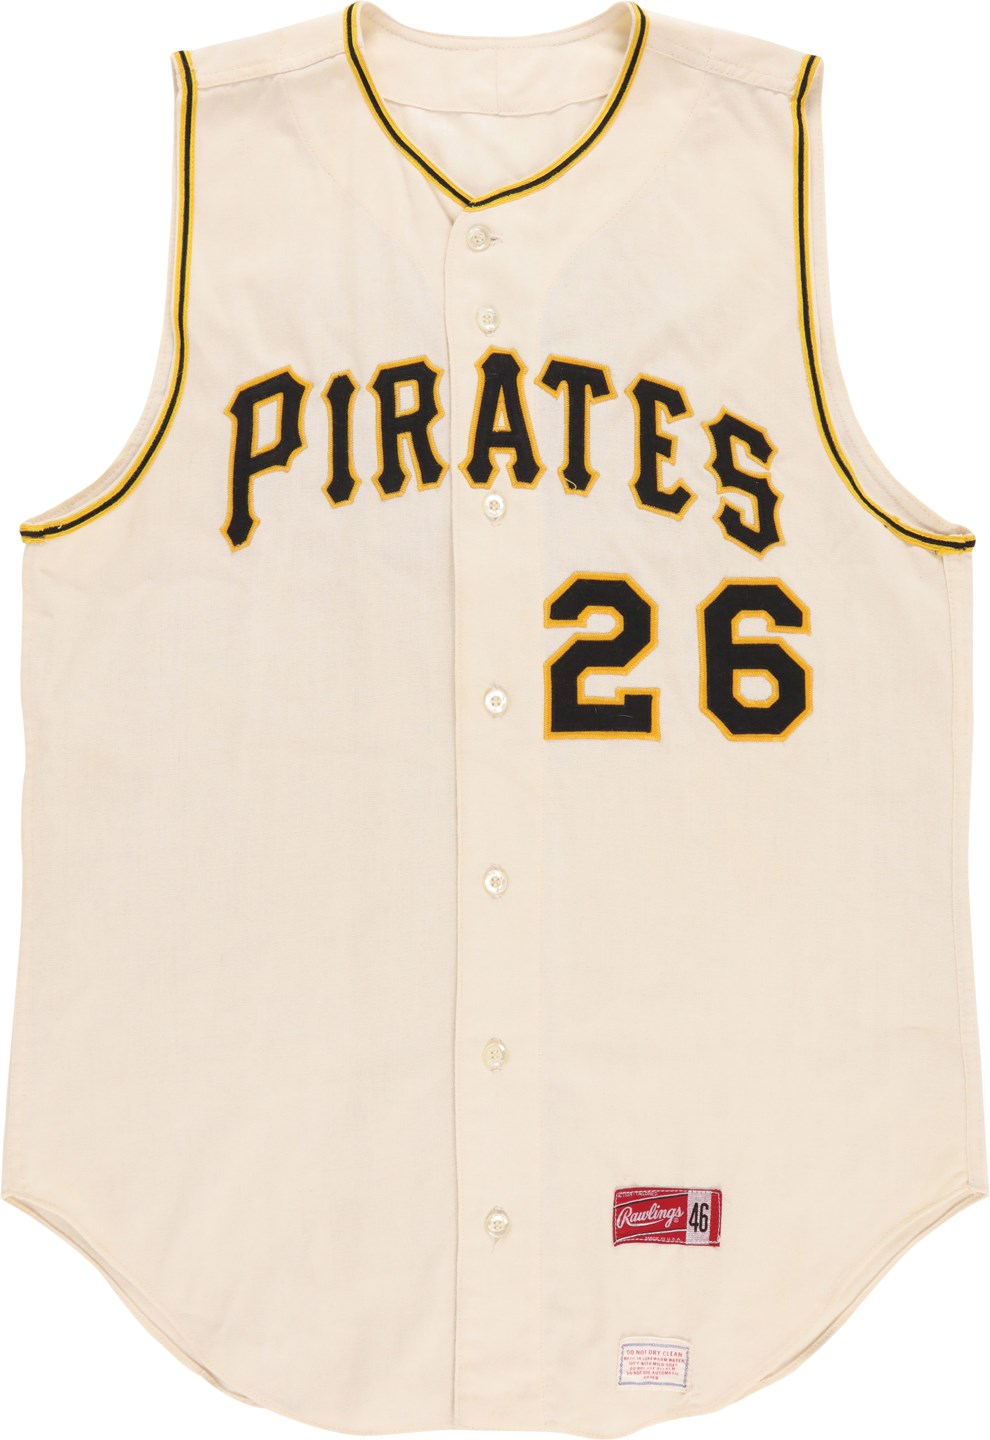 - Circa 1967 Pittsburgh Pirates Game Issued Jersey